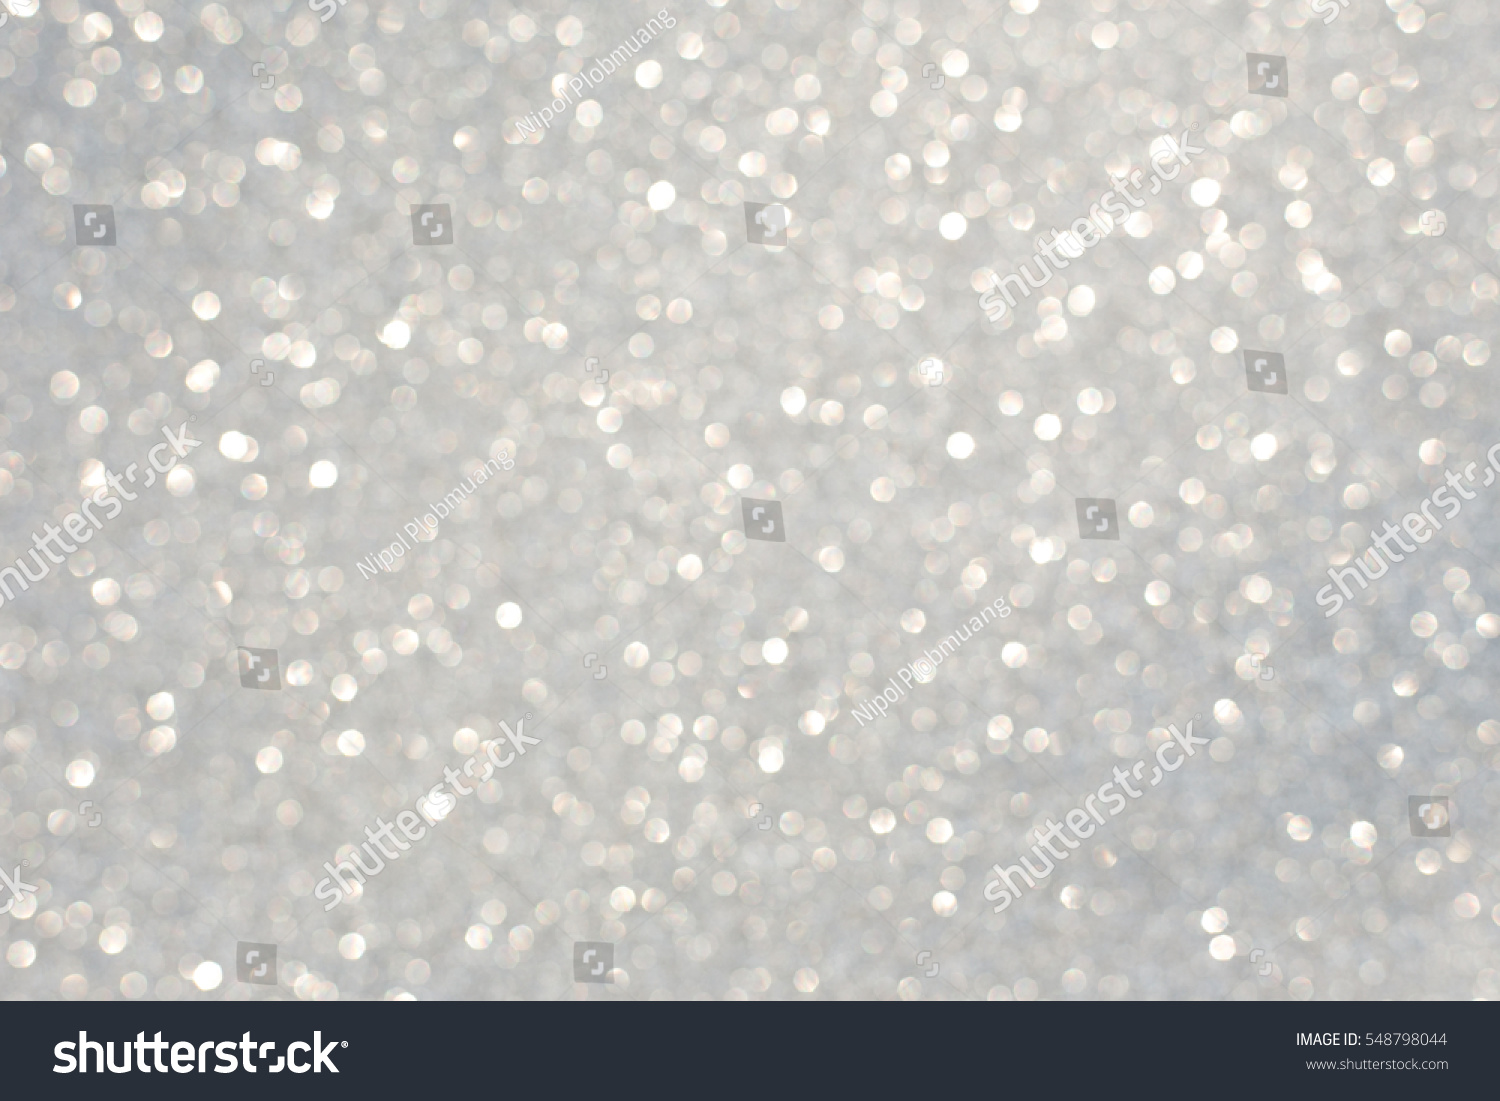 White Silver Gradient Glitter Bokeh Abstract Texture Background Stock ...